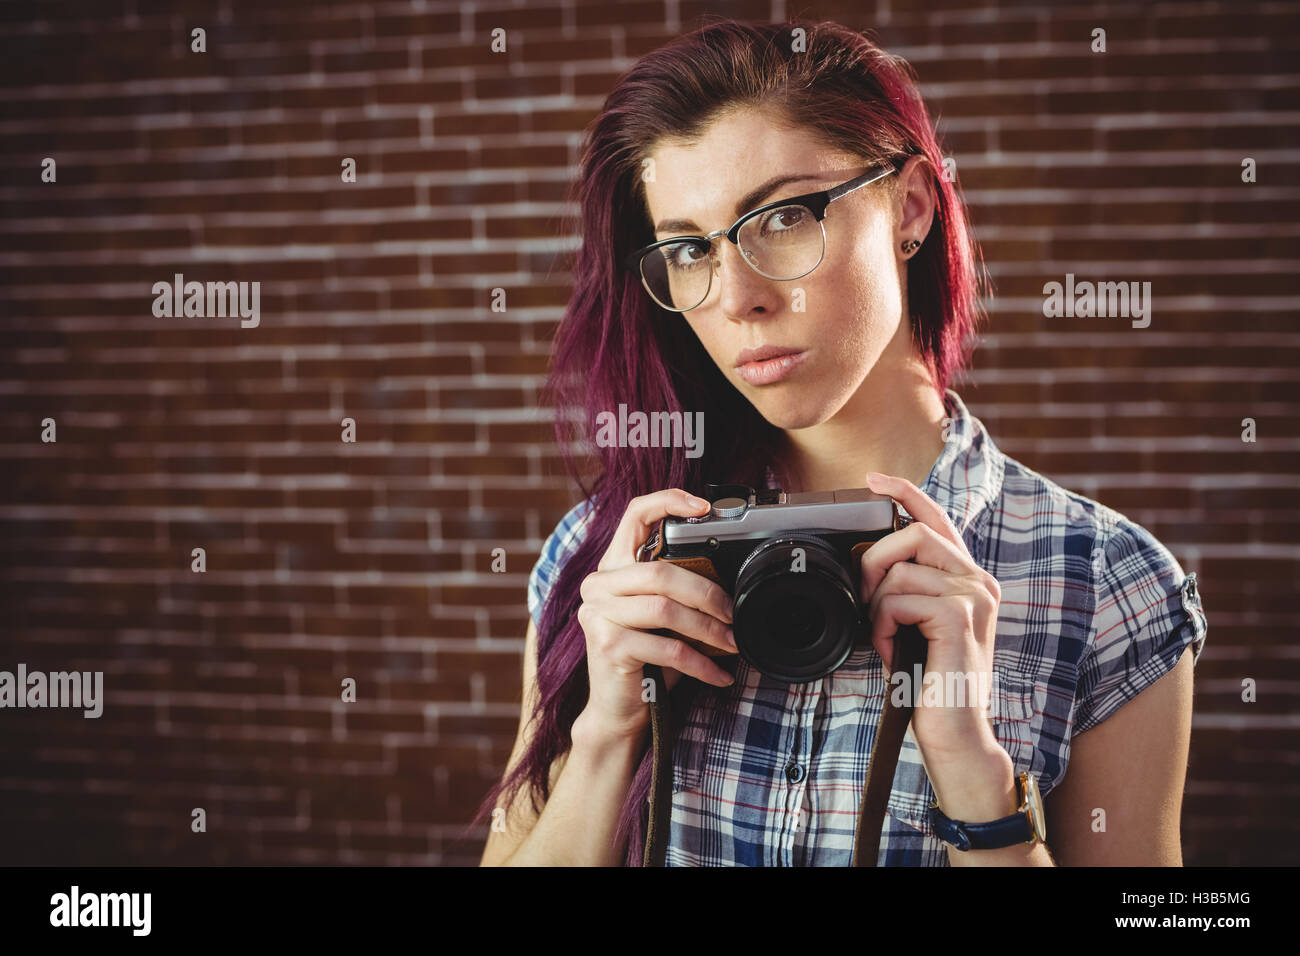 Woman holding a camera Banque D'Images